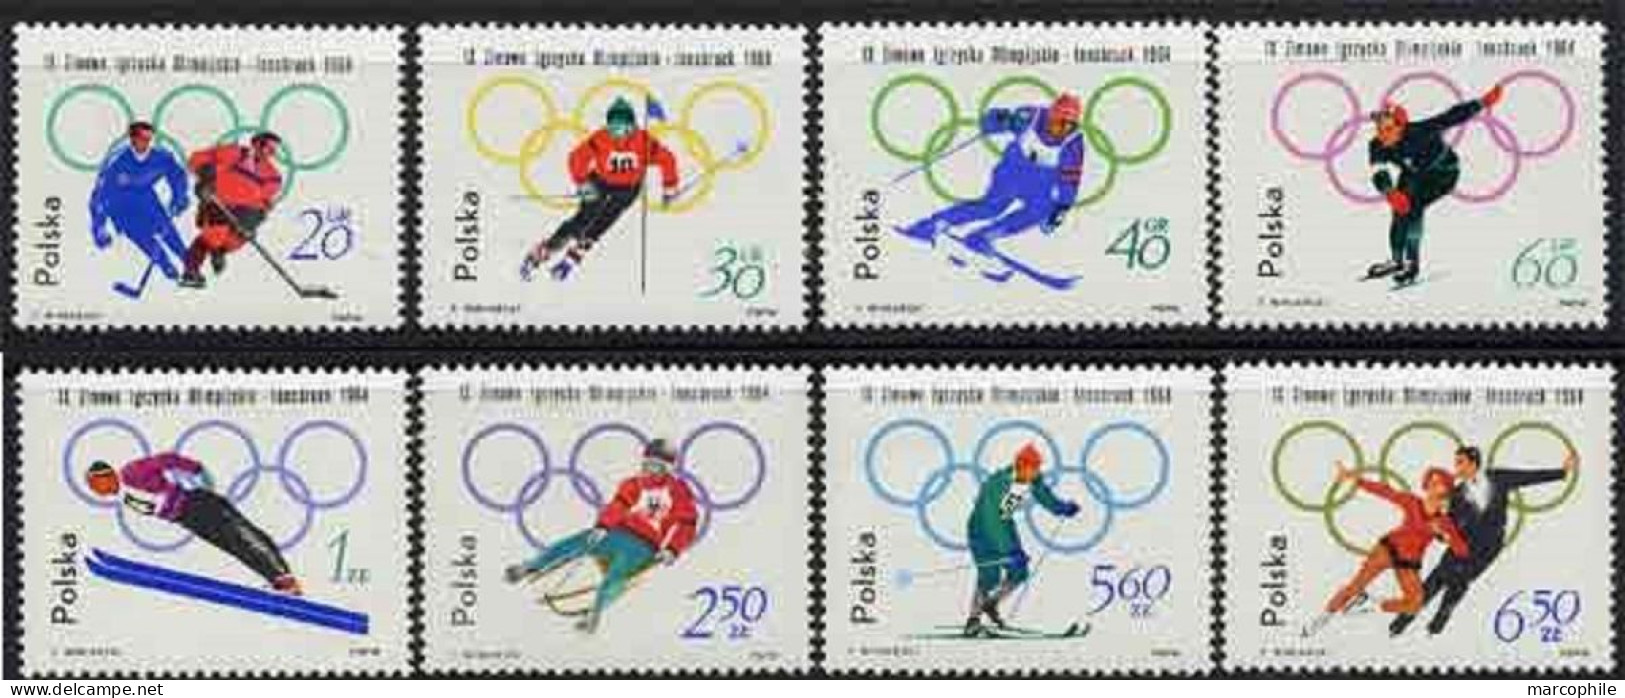 JEUX OLYMPIQUES HIVER INNSBRUCK / 1964 POLOGNE # 1322 A 1329 ** / COTE 6.50 EURO (ref 6275f) - Inverno1964: Innsbruck